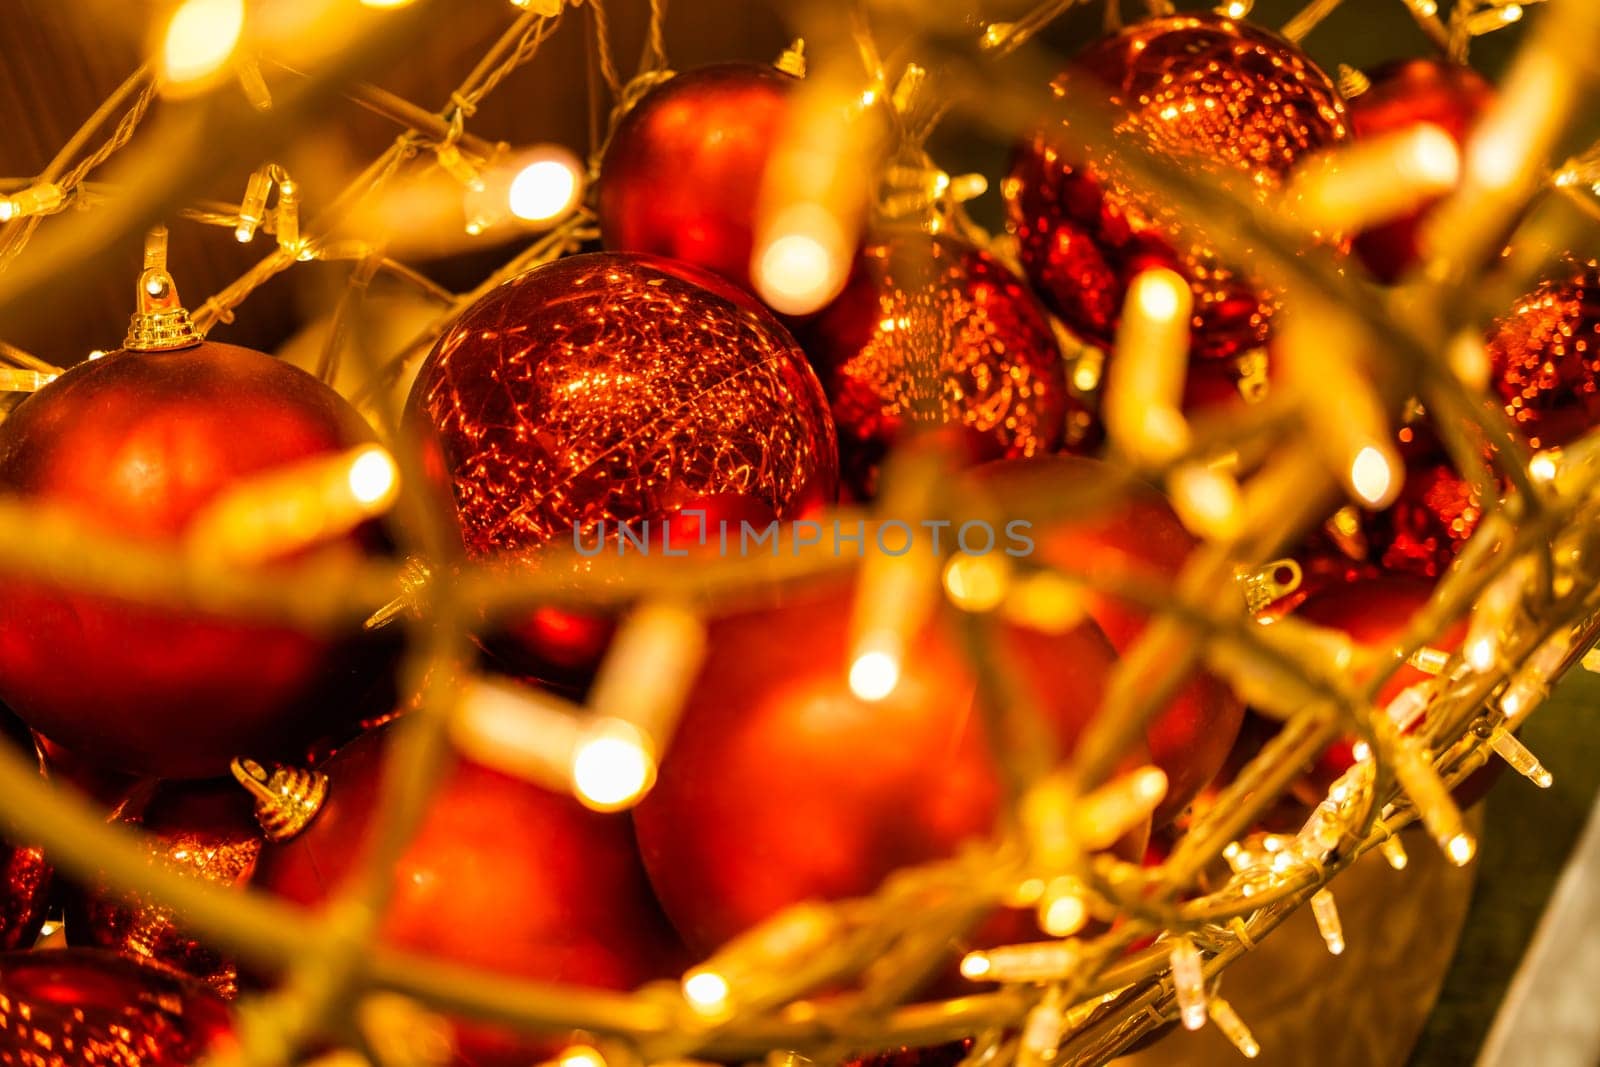 Red glowing Christmas balls garlands close-up. Holidays decoration and festive xmas concept. Copy space and empty place for text, mock up greeting card.